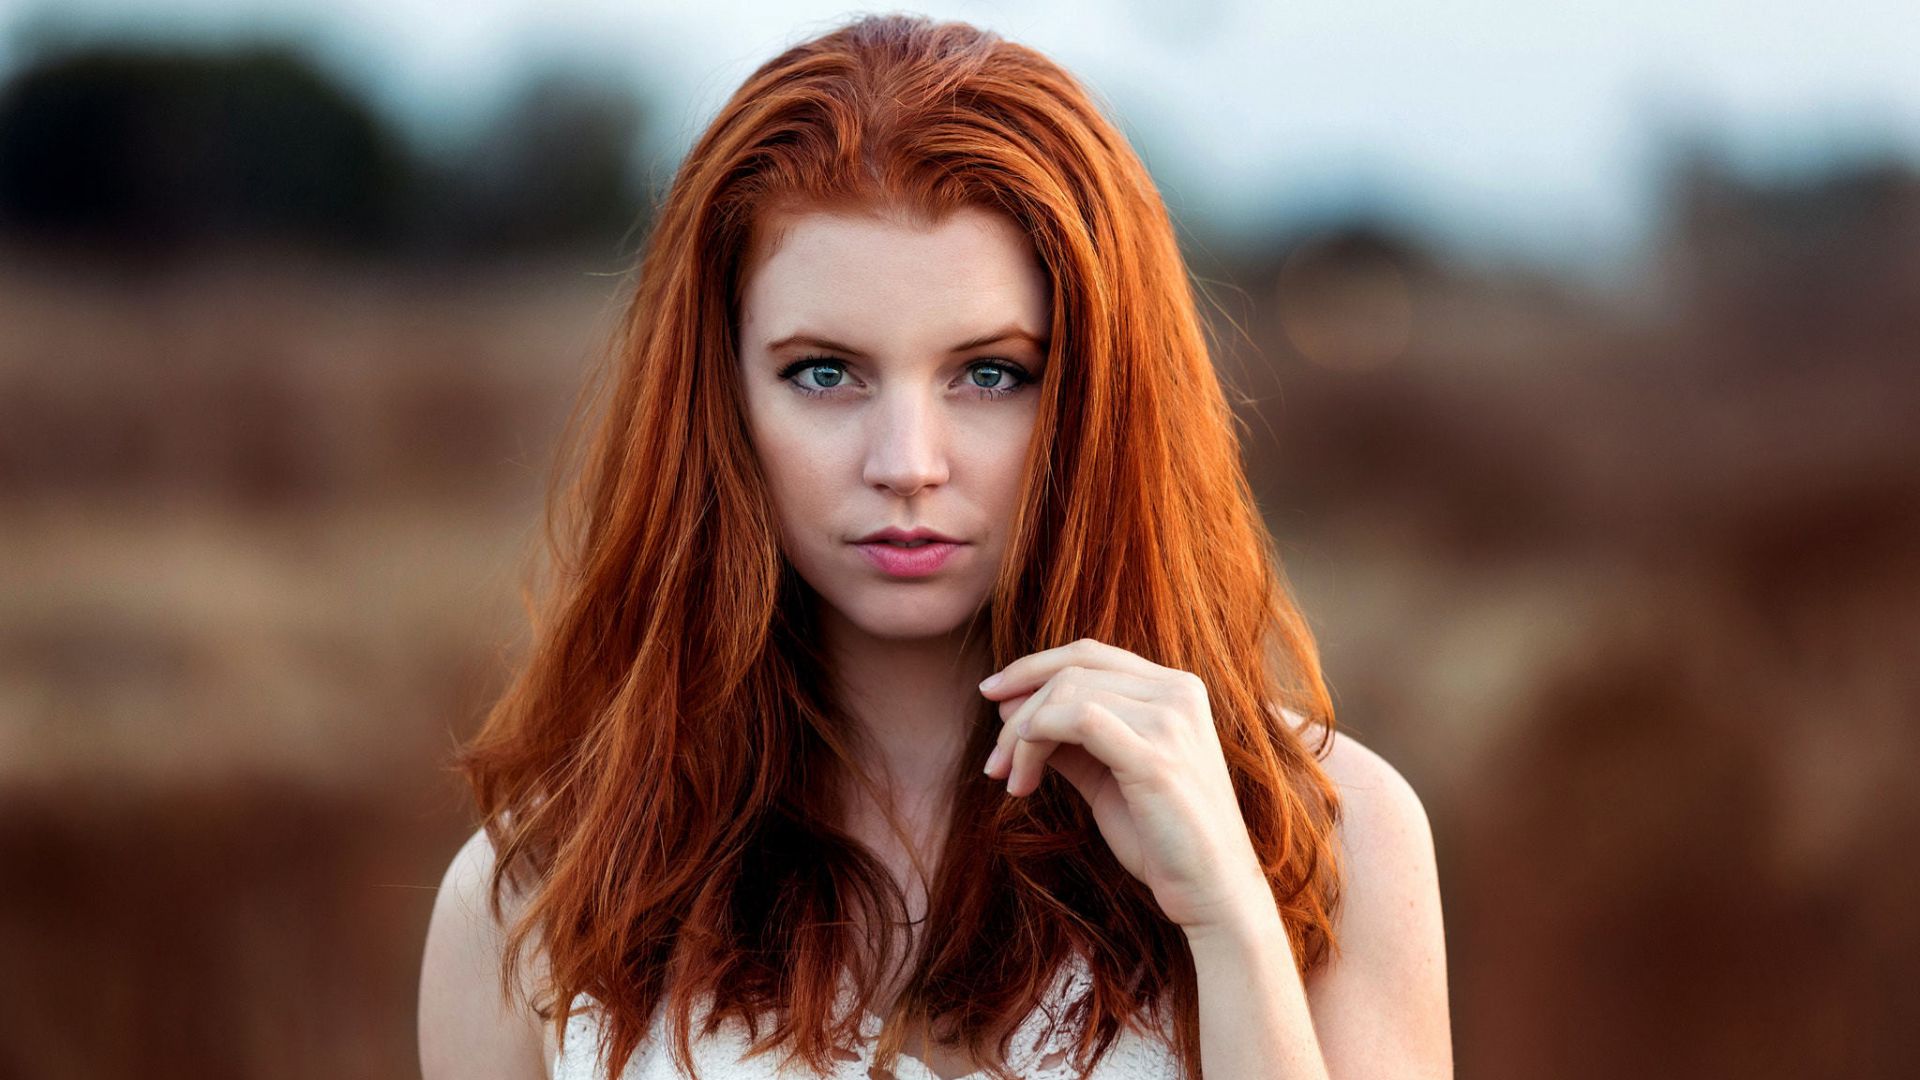 Desktop Wallpaper Red Head, Green Eyes, Woman, Staring, Hd Image, Picture,  Background, B73273